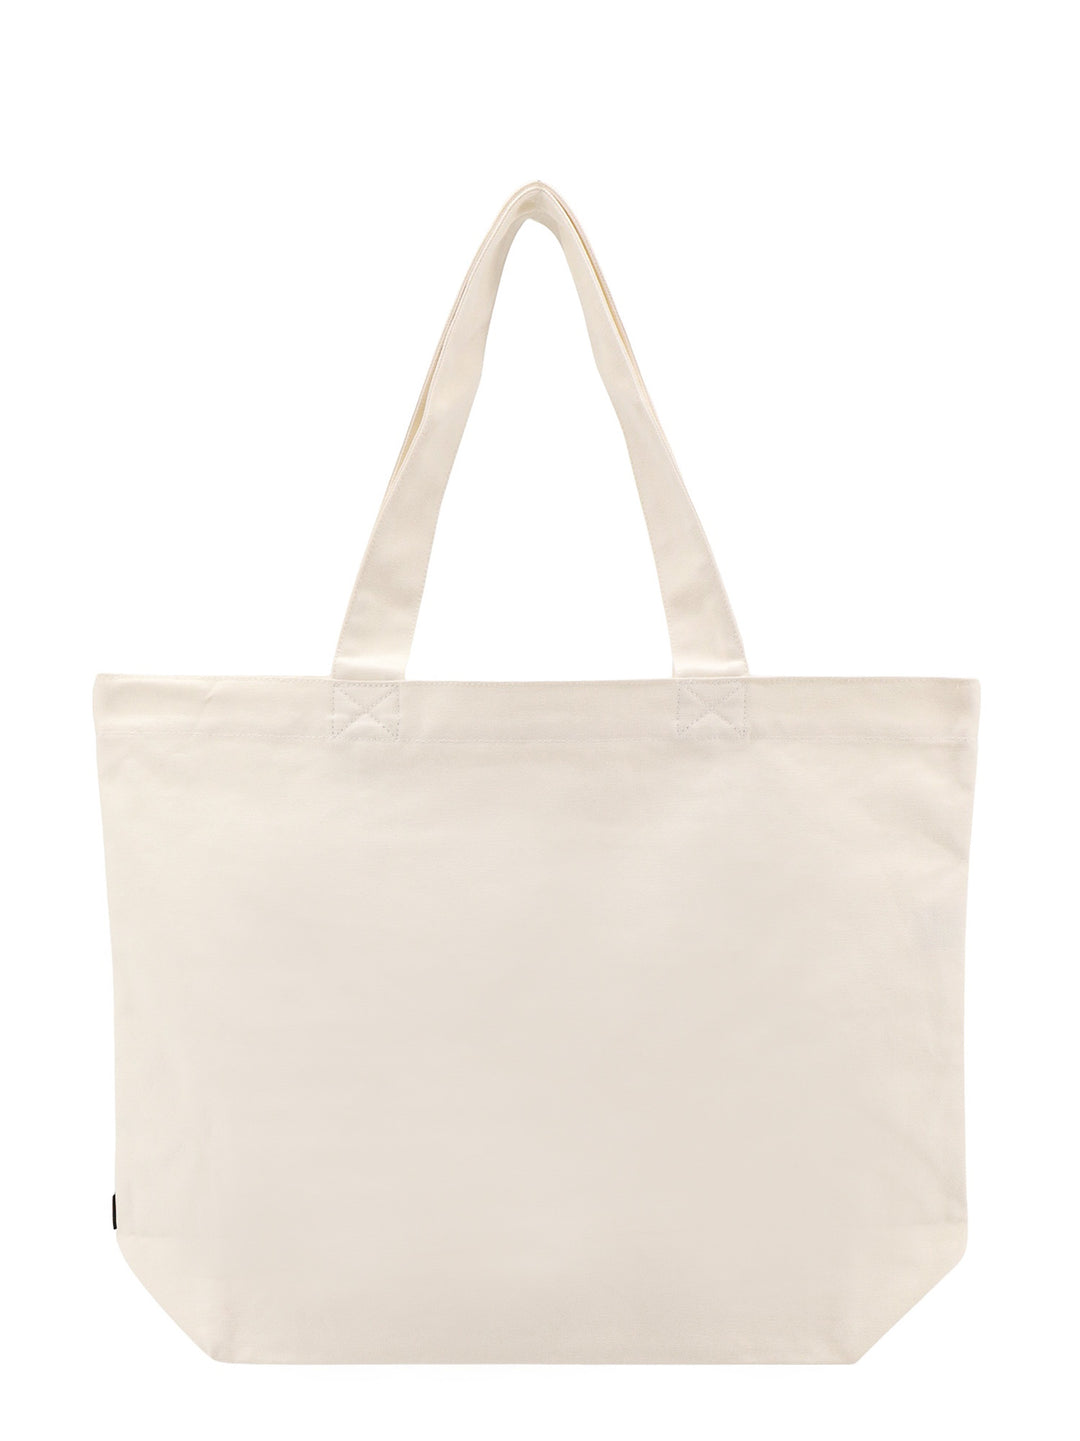 Borsa Tote Large in canvas